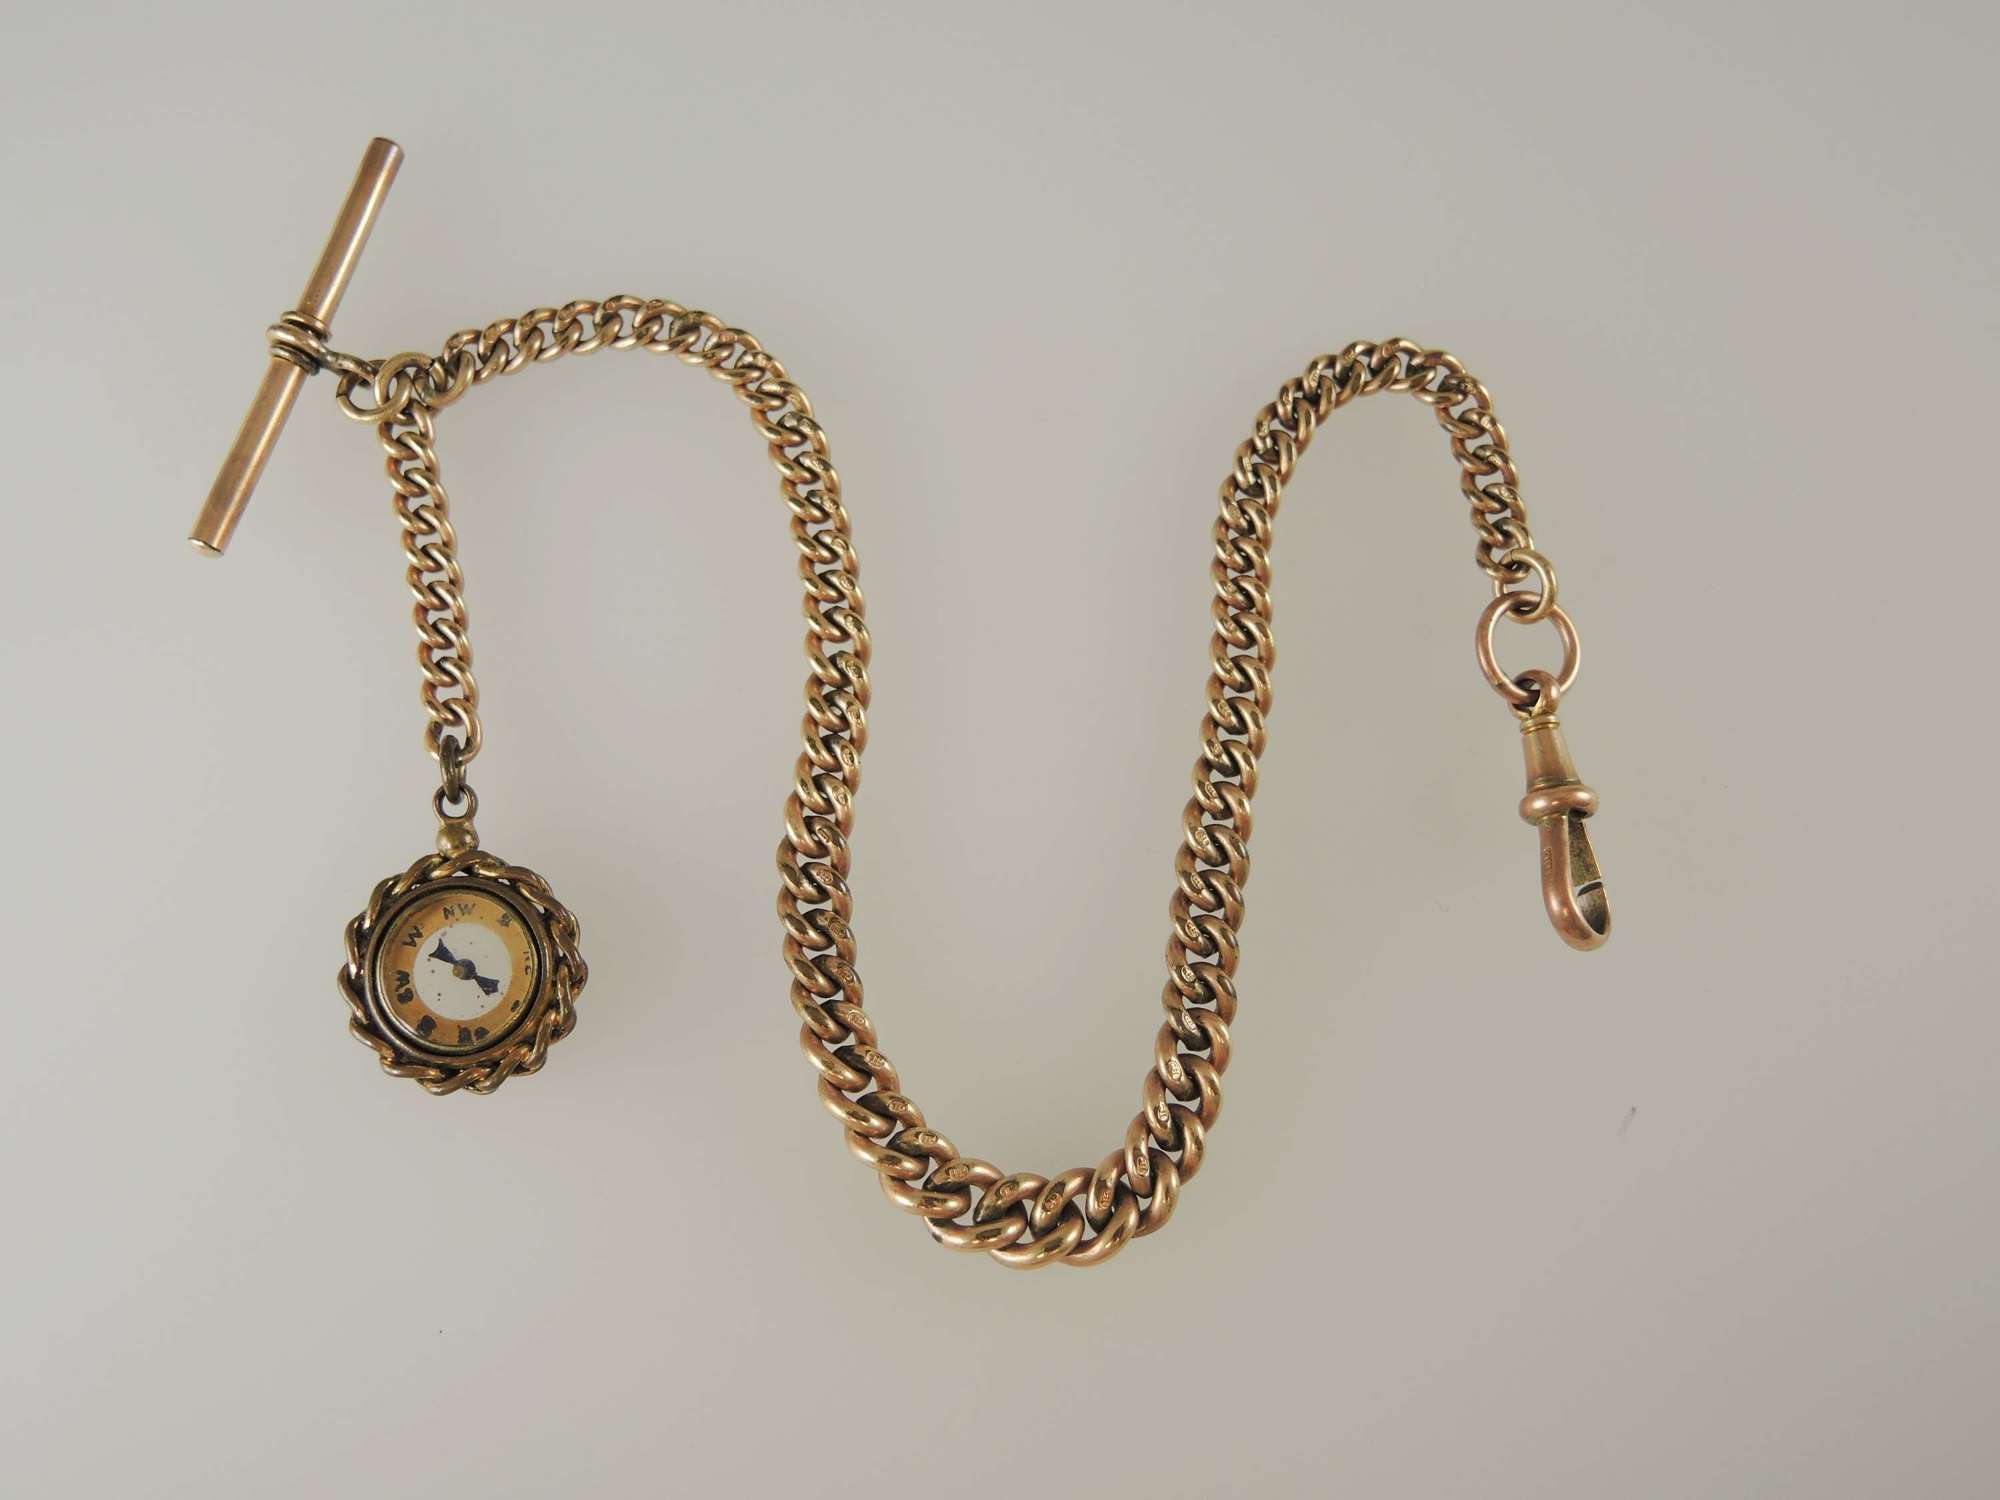 Victorian gilt watch chain with compass c1890